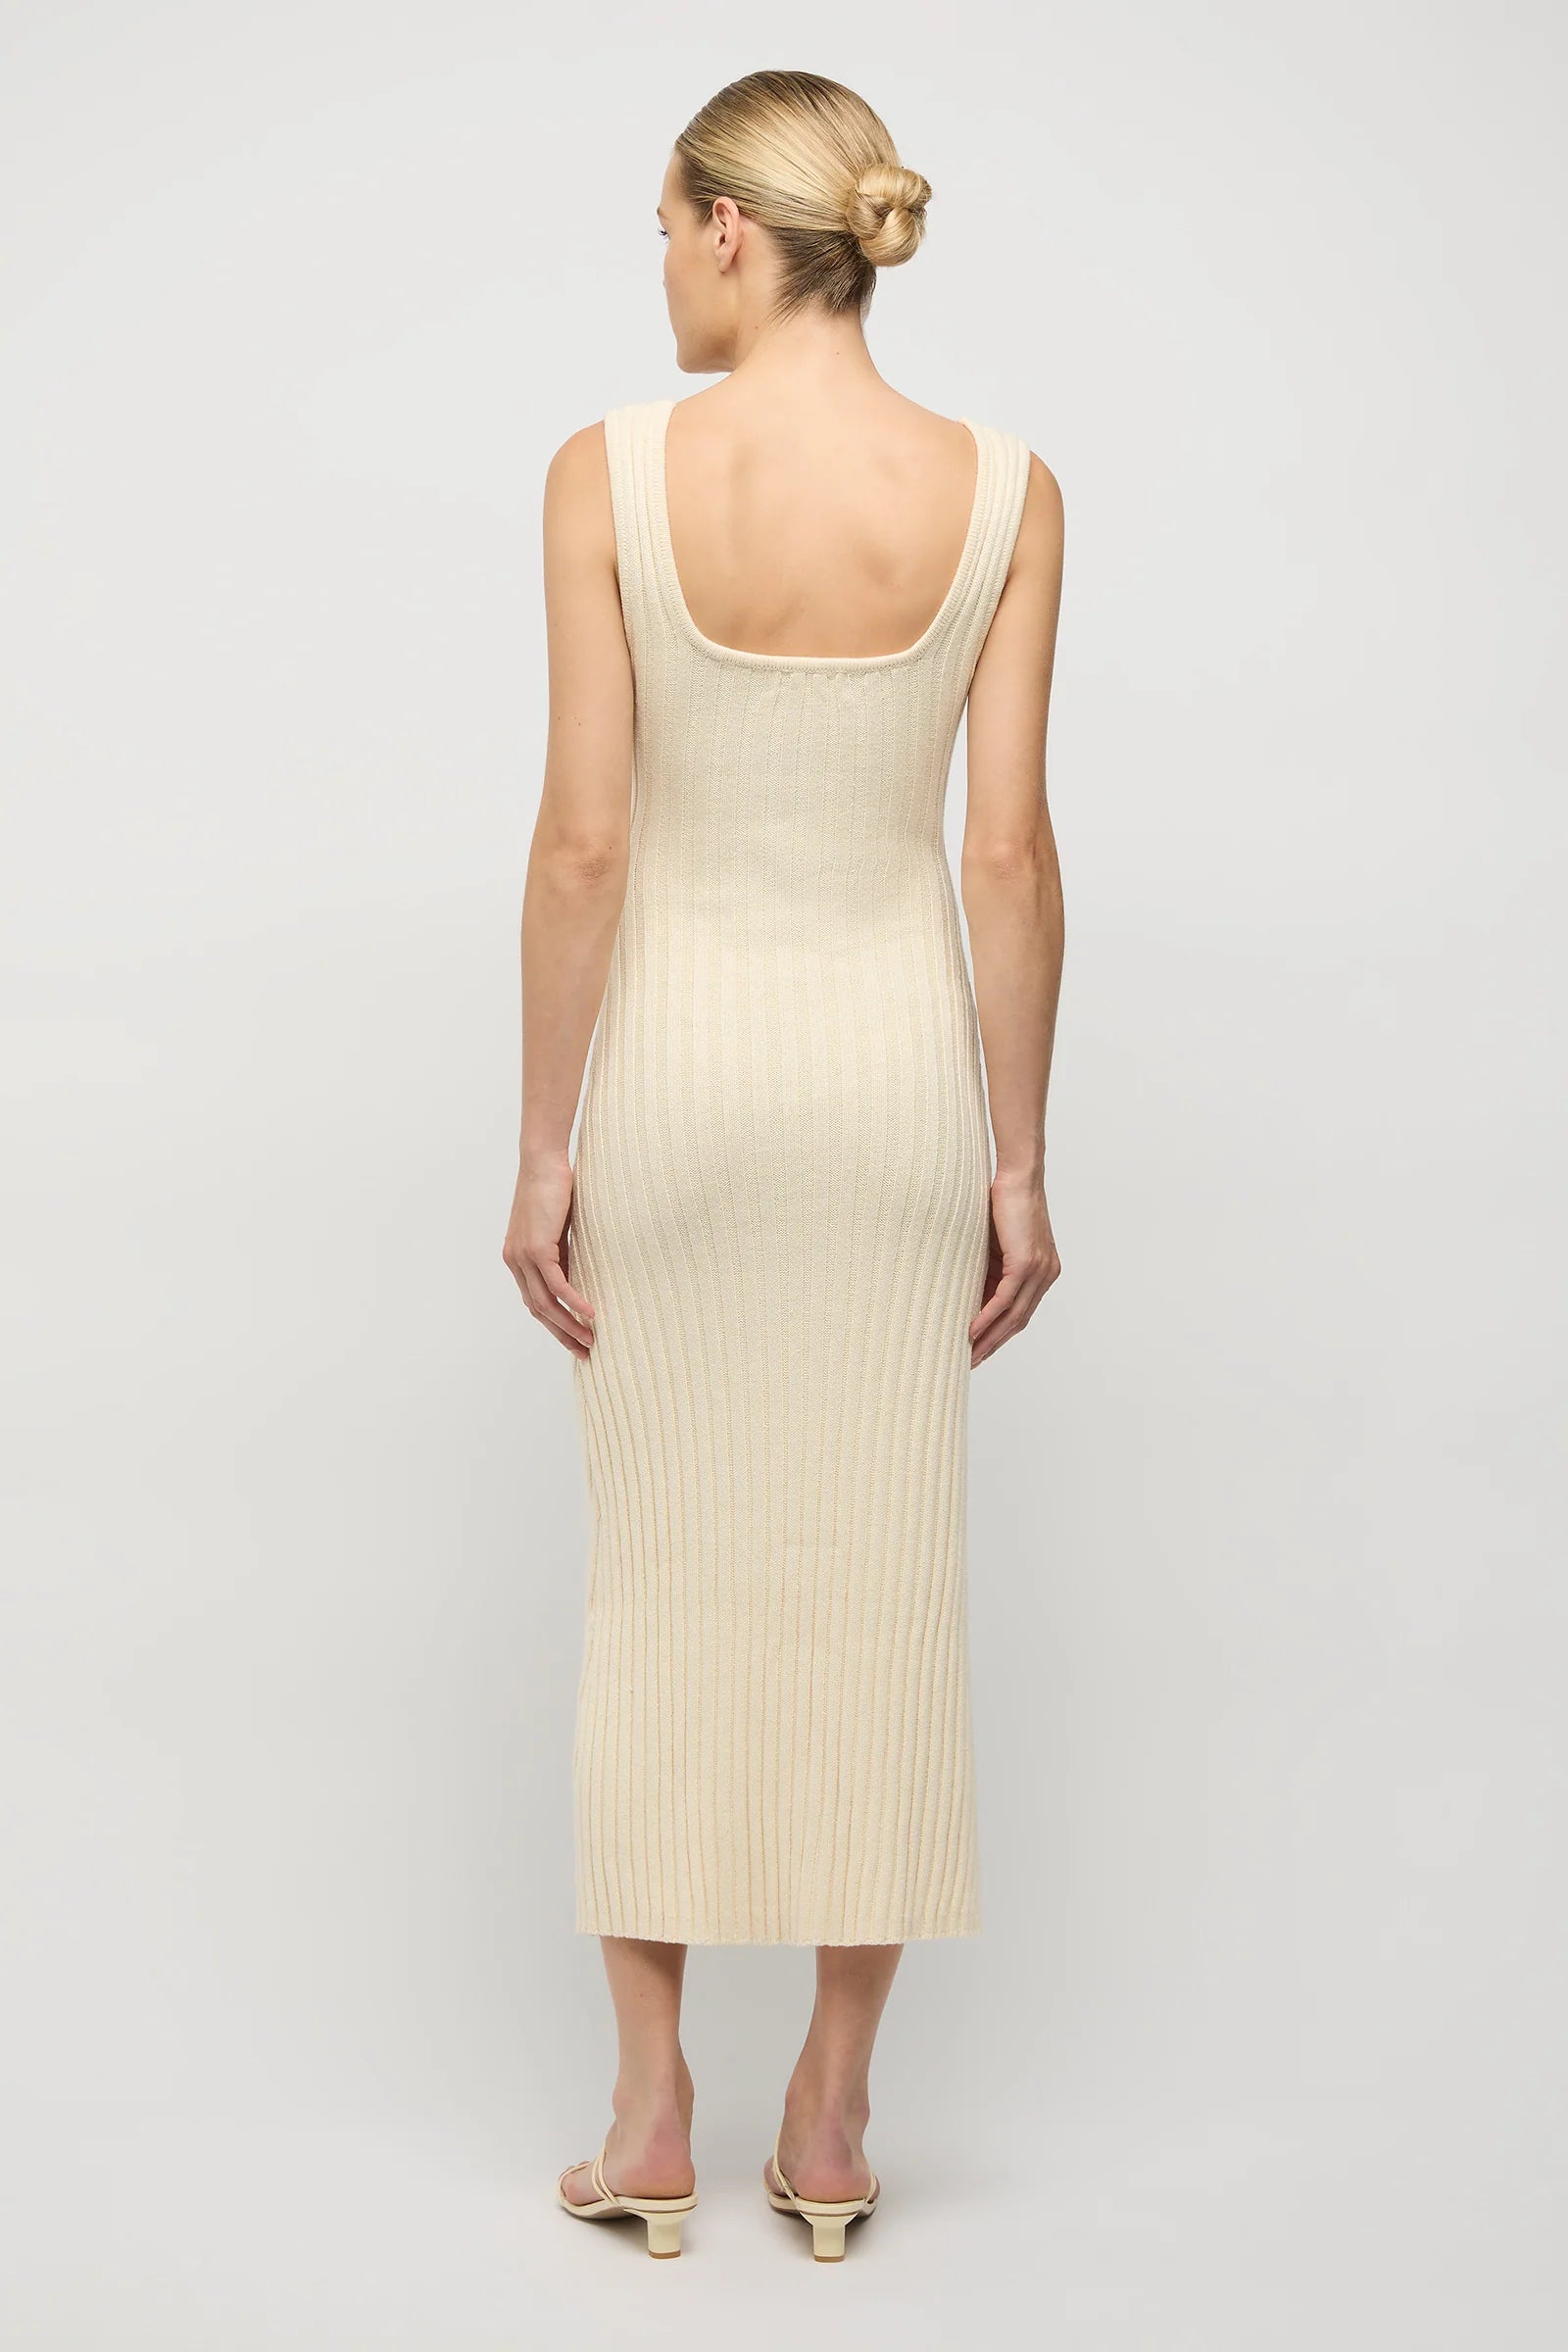 Rowan Square Neck Cotton Knit Dress in Natural